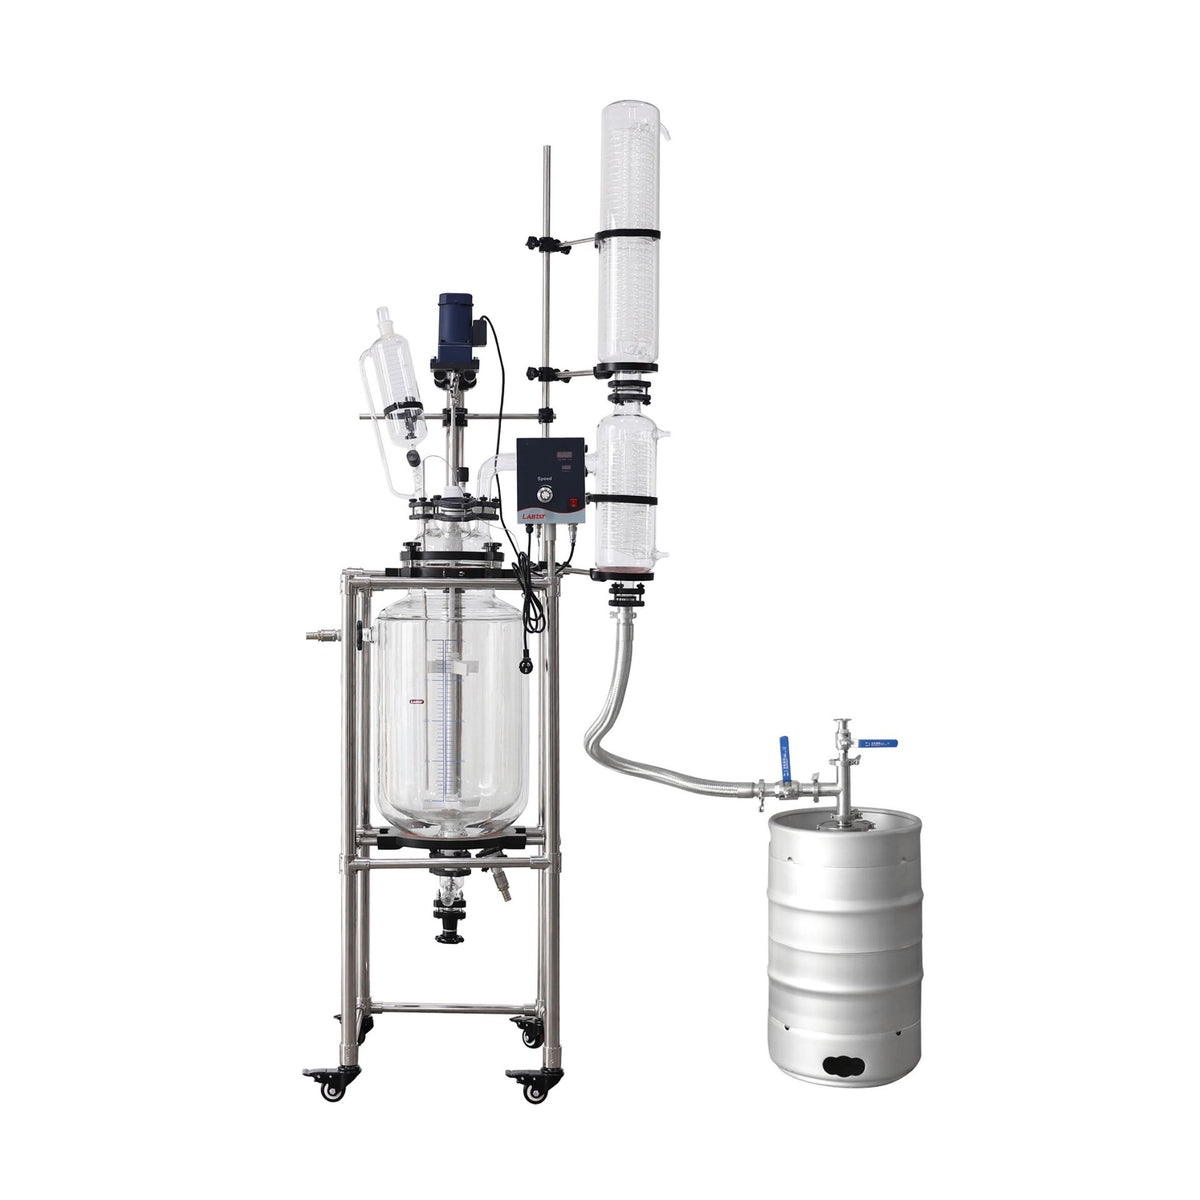 50L Jacketed Glass Evaporation Reactor Vessel Chemistry with Digital Display